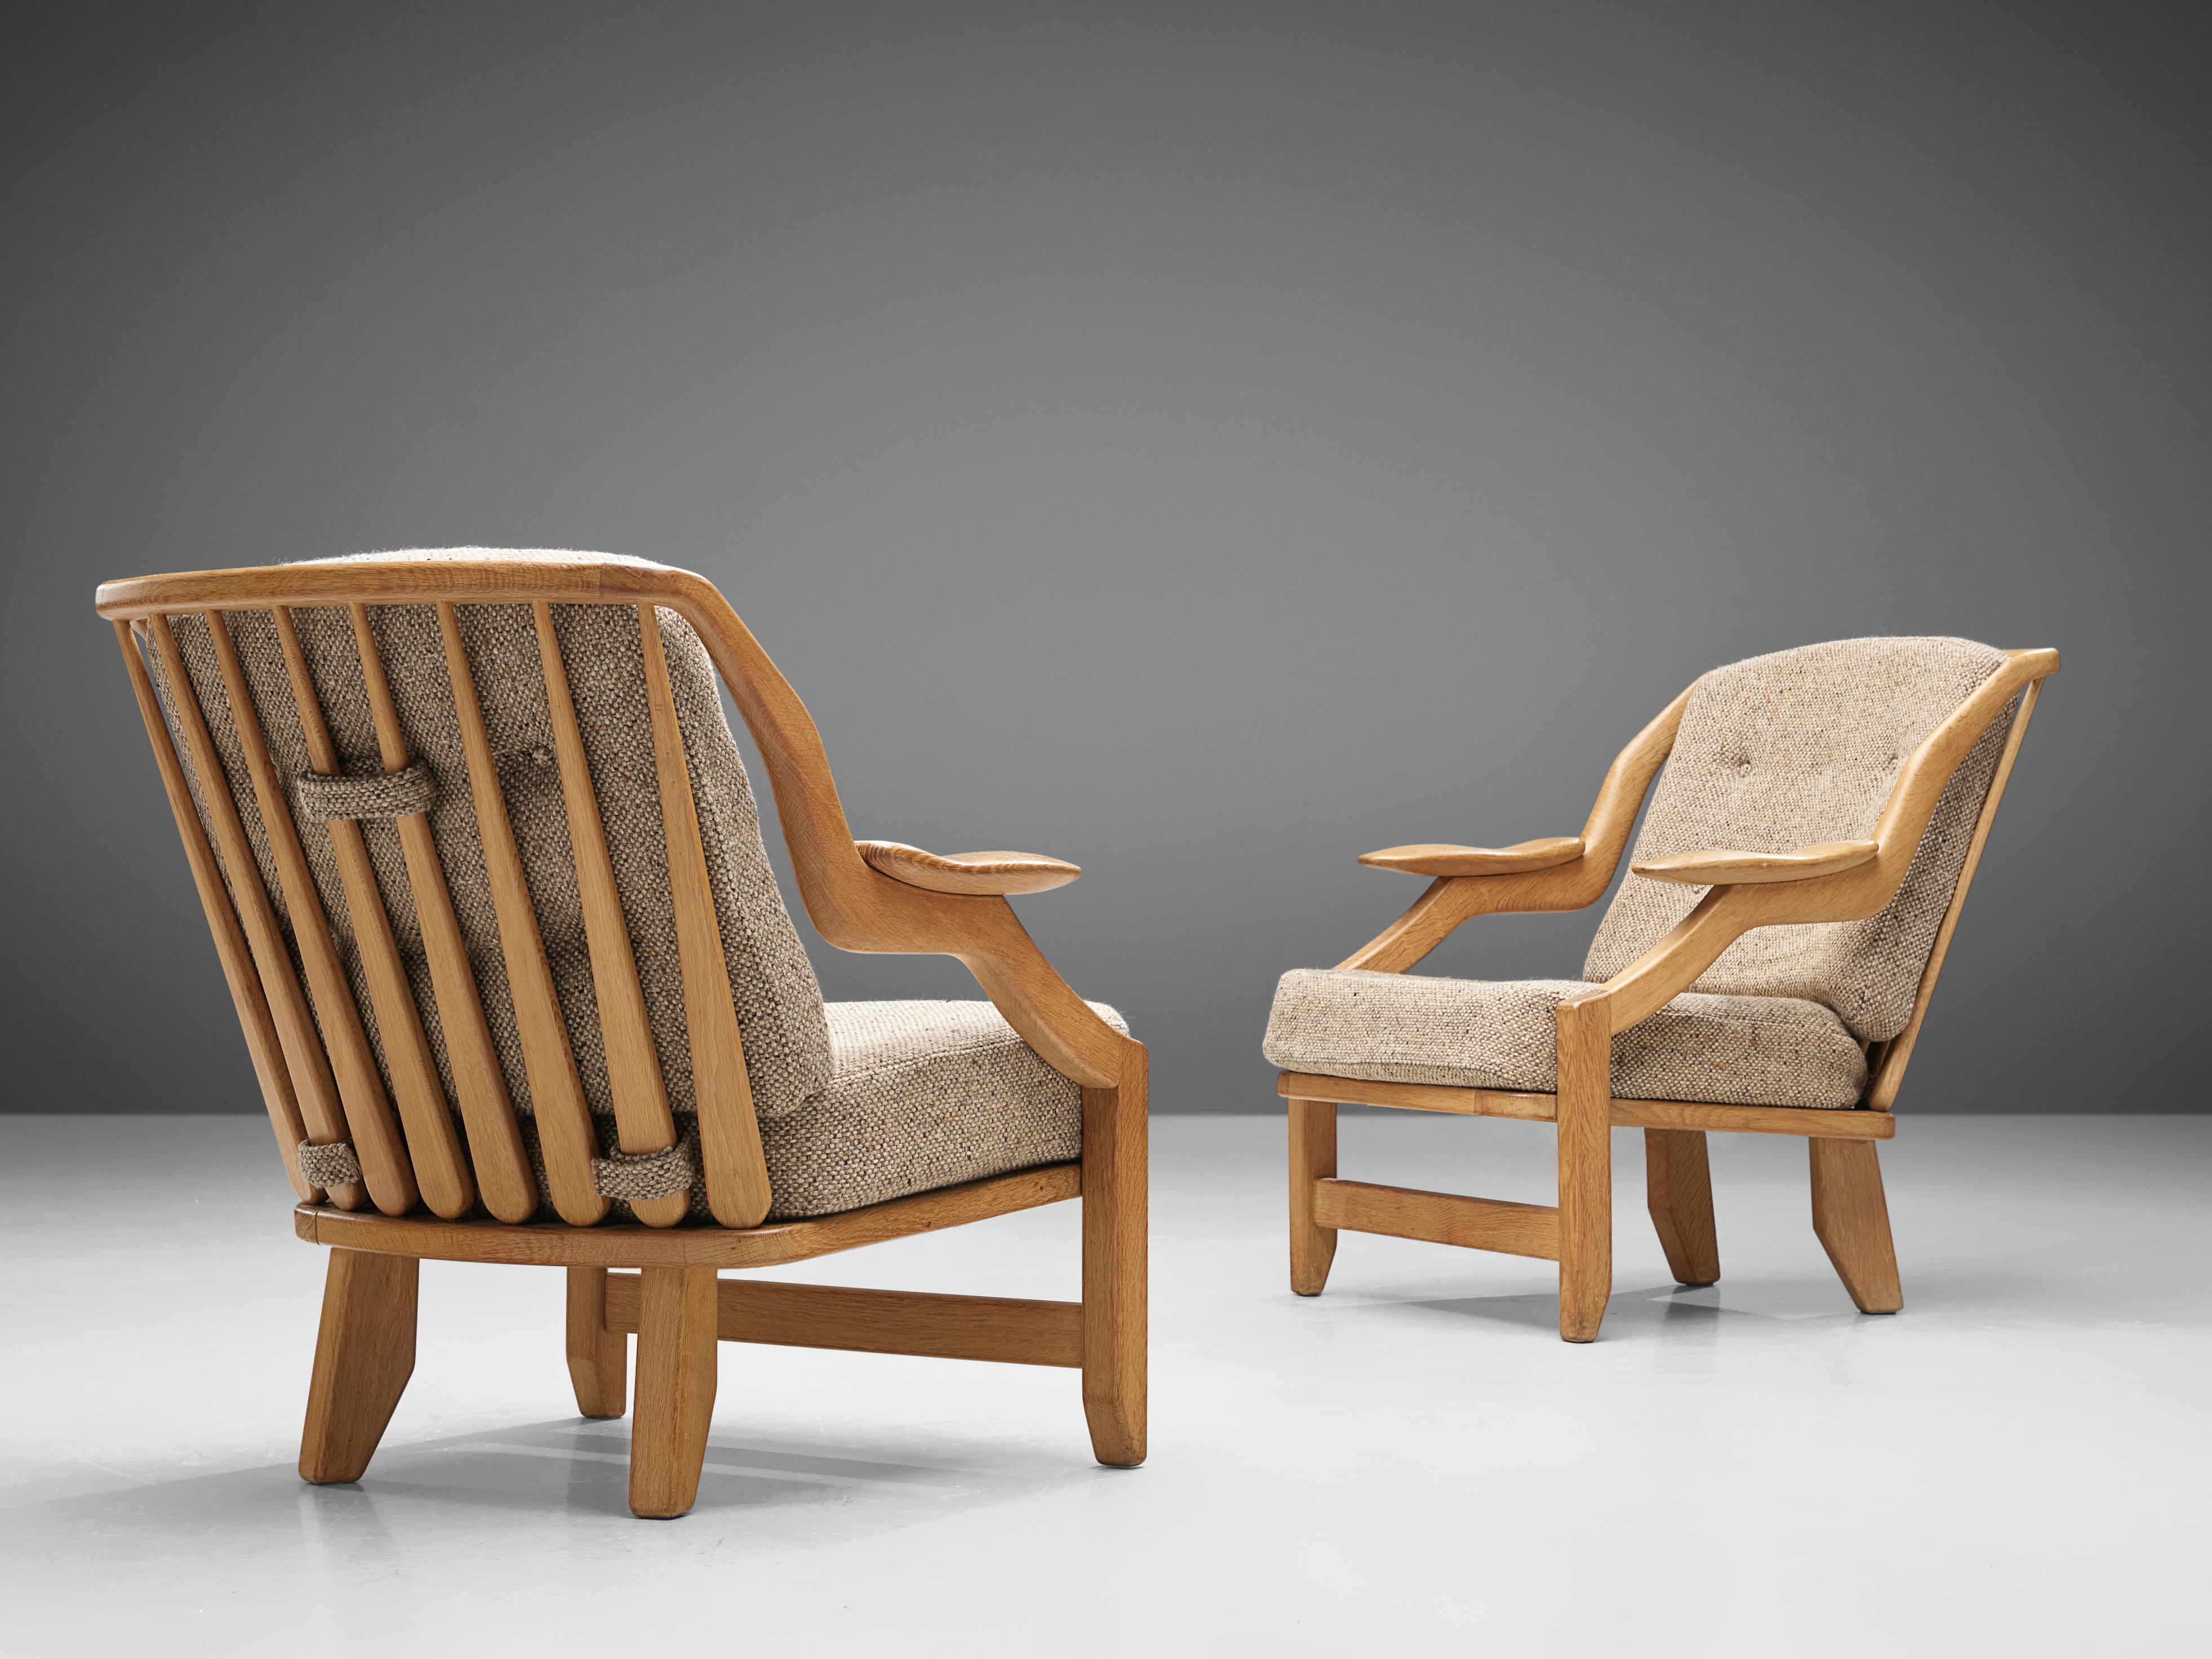 Guillerme et Chambron, pair of lounge chairs, oak, grey fabric, France, 1950s.

This French designer duo is known for their extreme high quality solid oak furniture, from which this set is another great example. These chairs have a very